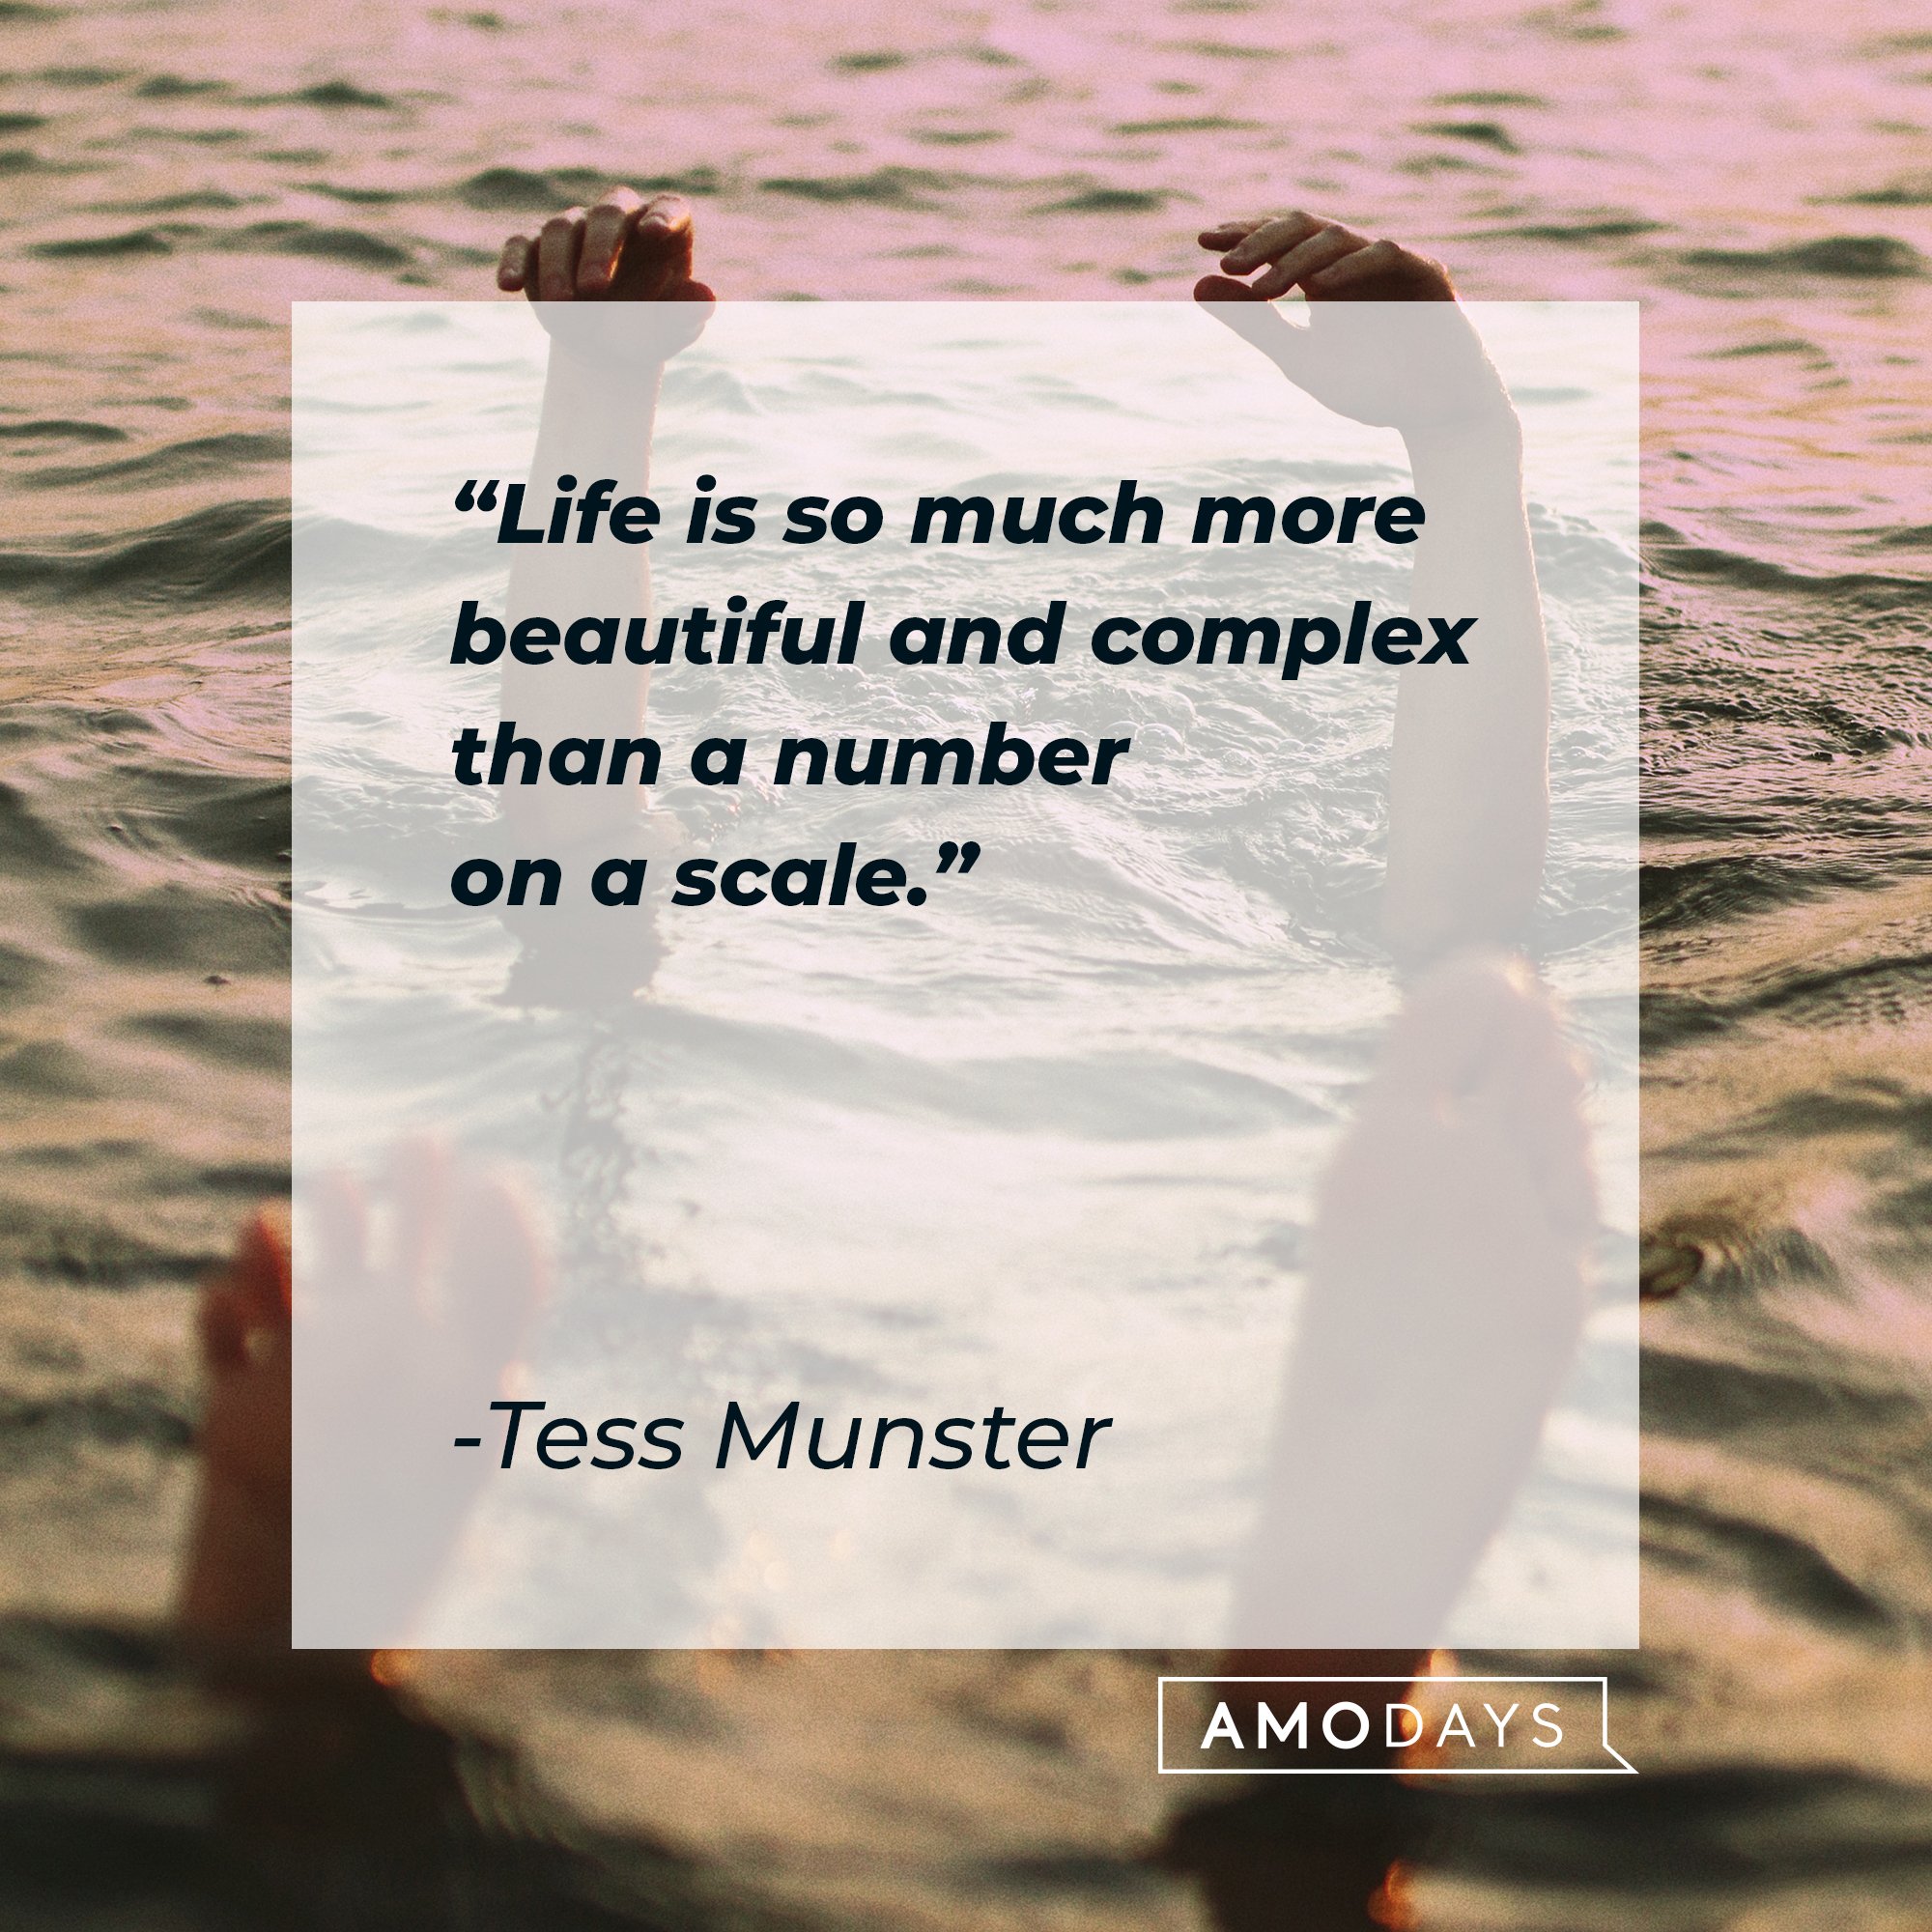   Tess Munster’s quote: "Life is so much more beautiful and complex than a number on a scale." | Image: AmoDays